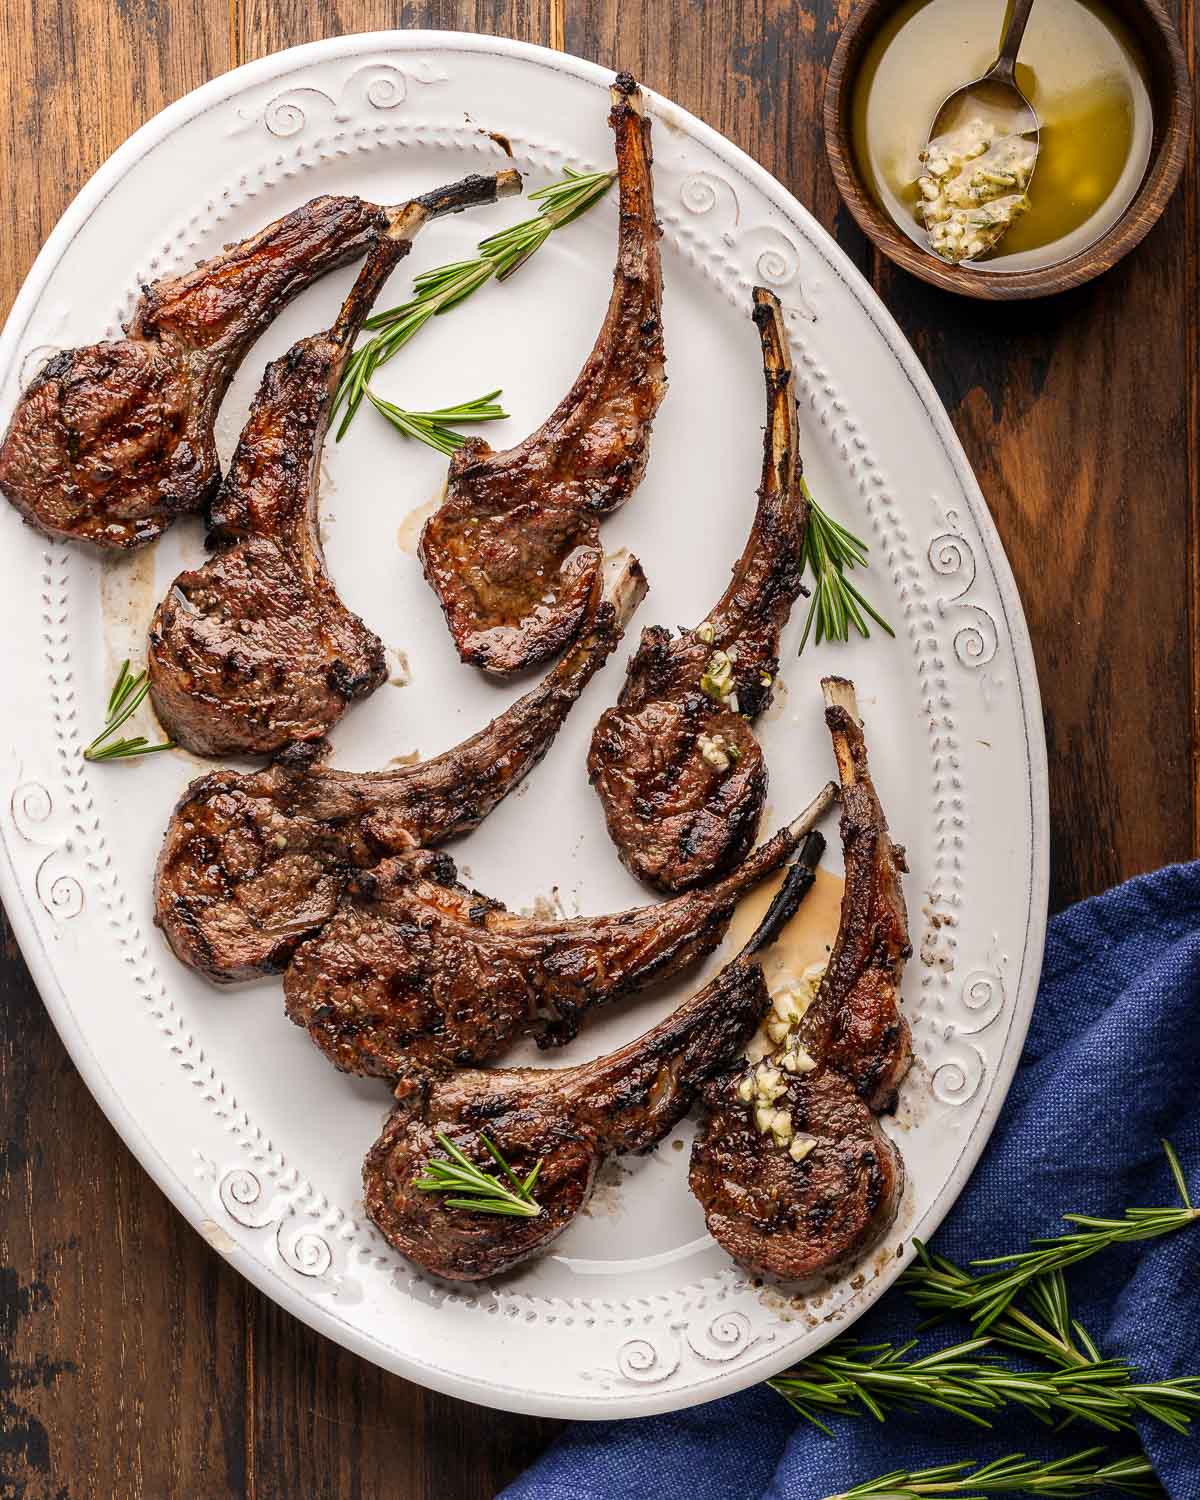 Platter of grilled lamb rib chops with bowl of lemon garlic sauce on the side.